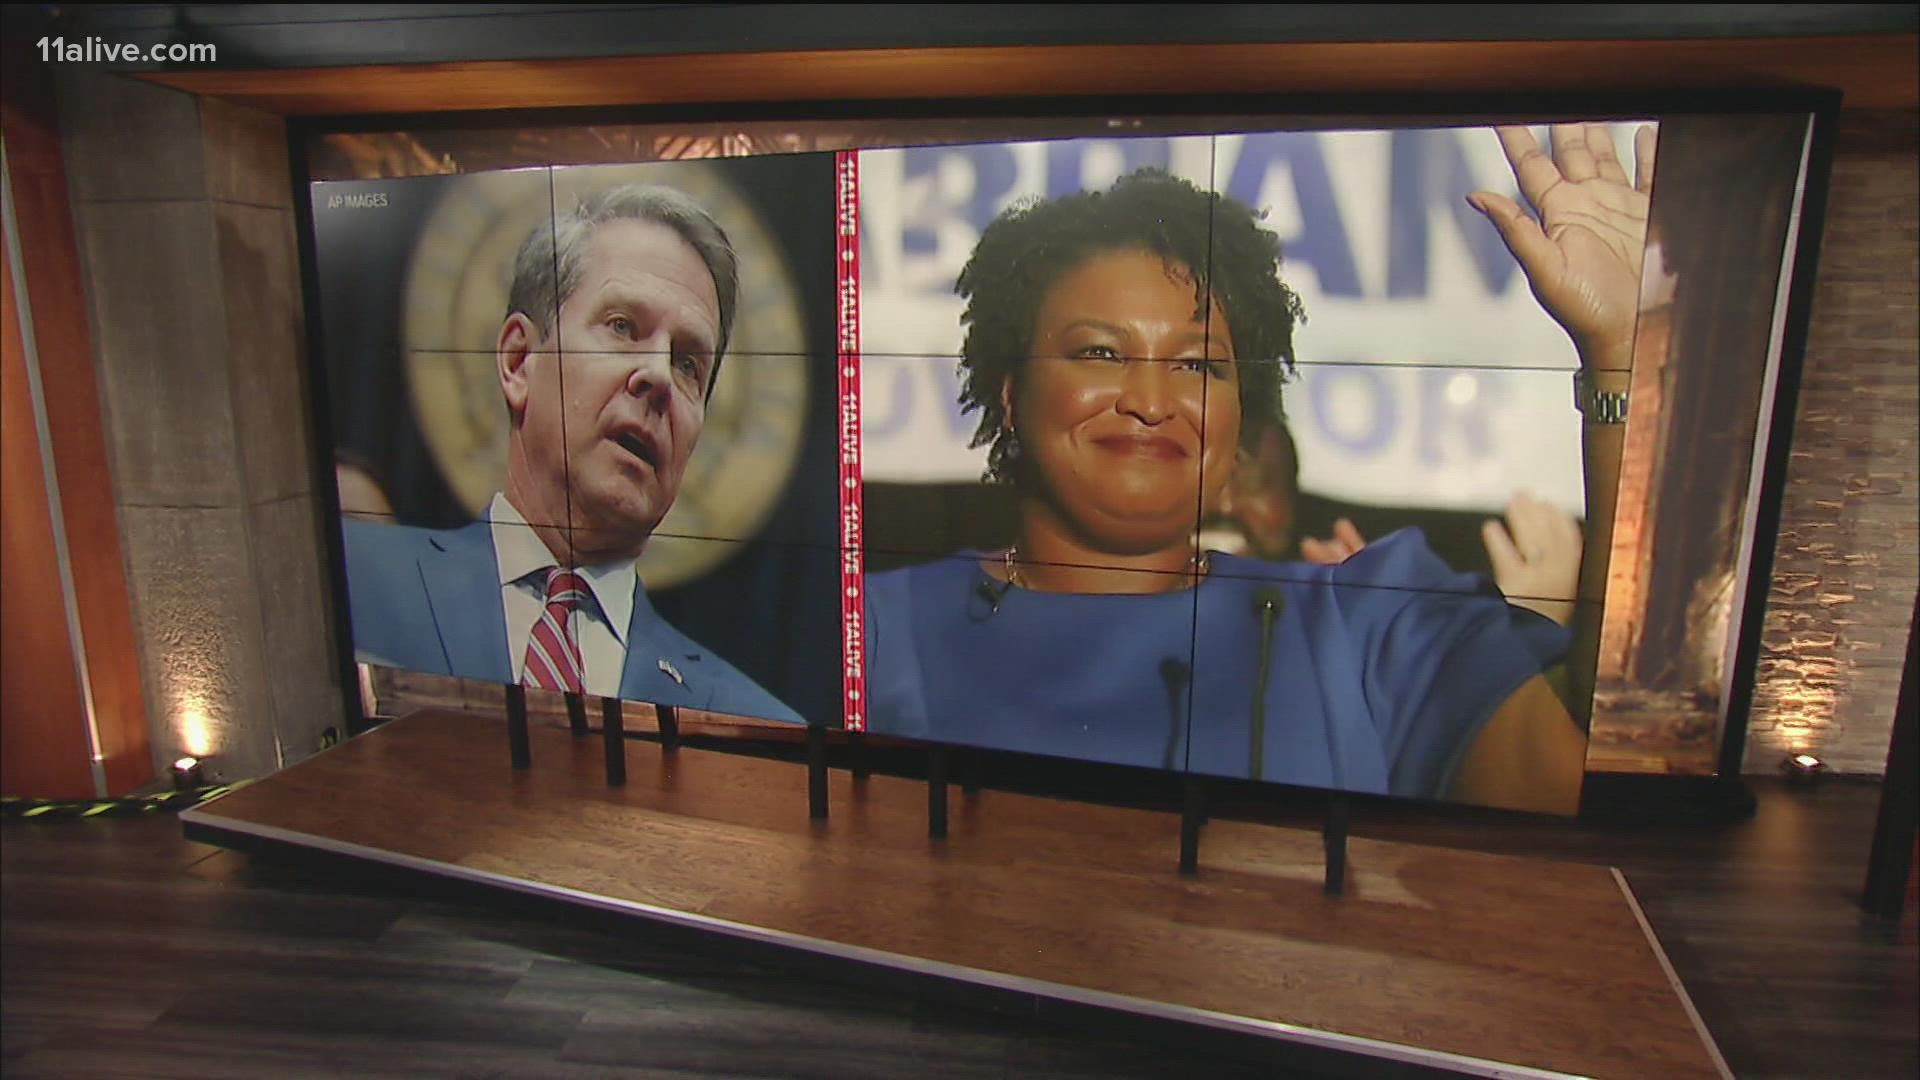 Governor Brian Kemp fired back at Stacey Abrams, who formally announced her candidacy for governor Wednesday, and is considered the democratic favorite to face him.